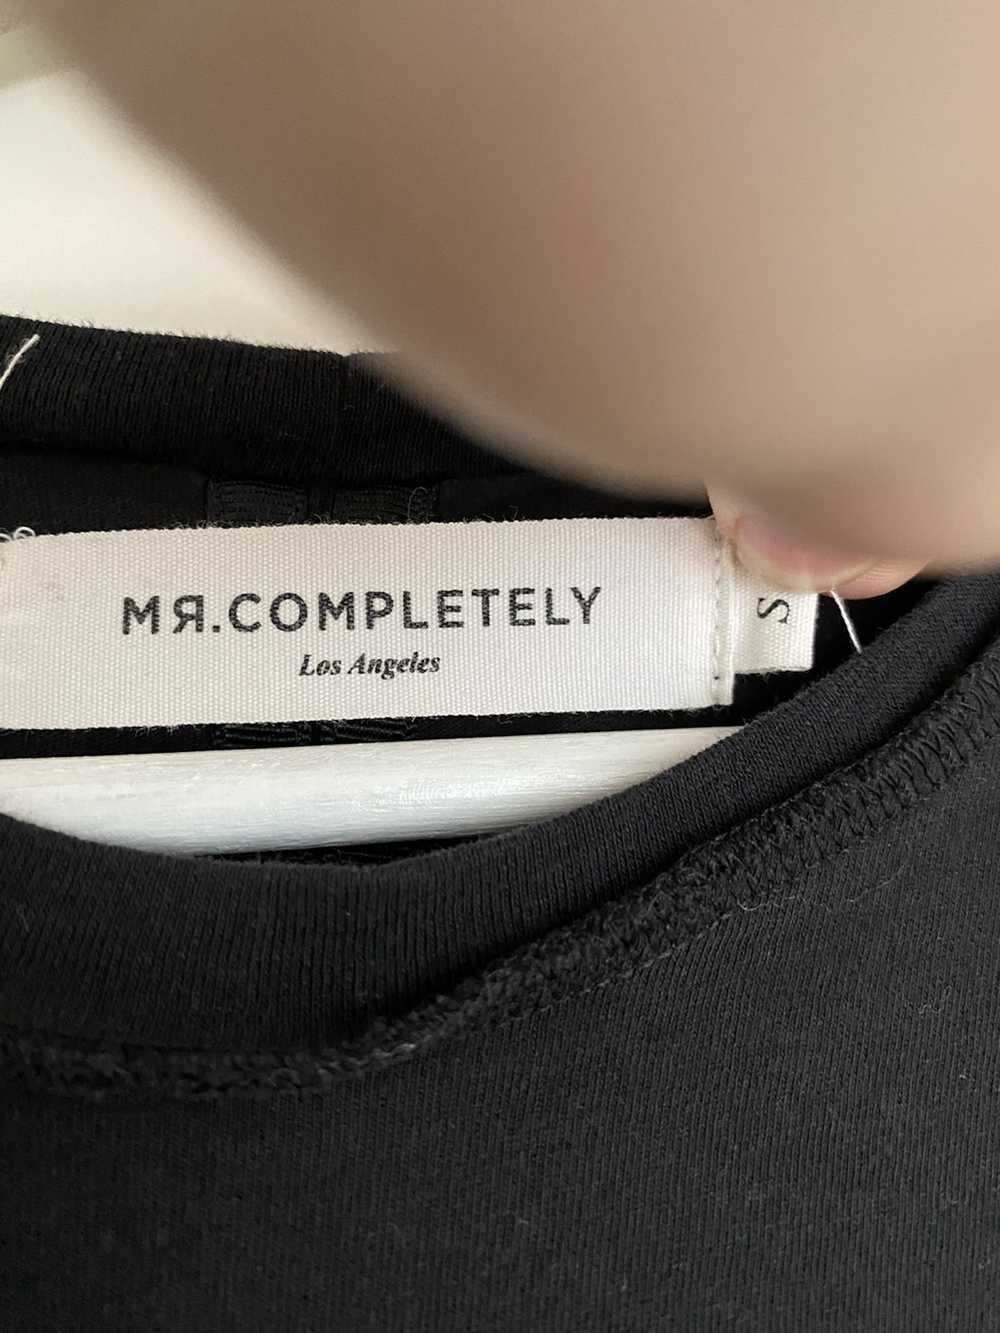 Mr. Completely Inside Out Boxy Tee - image 2